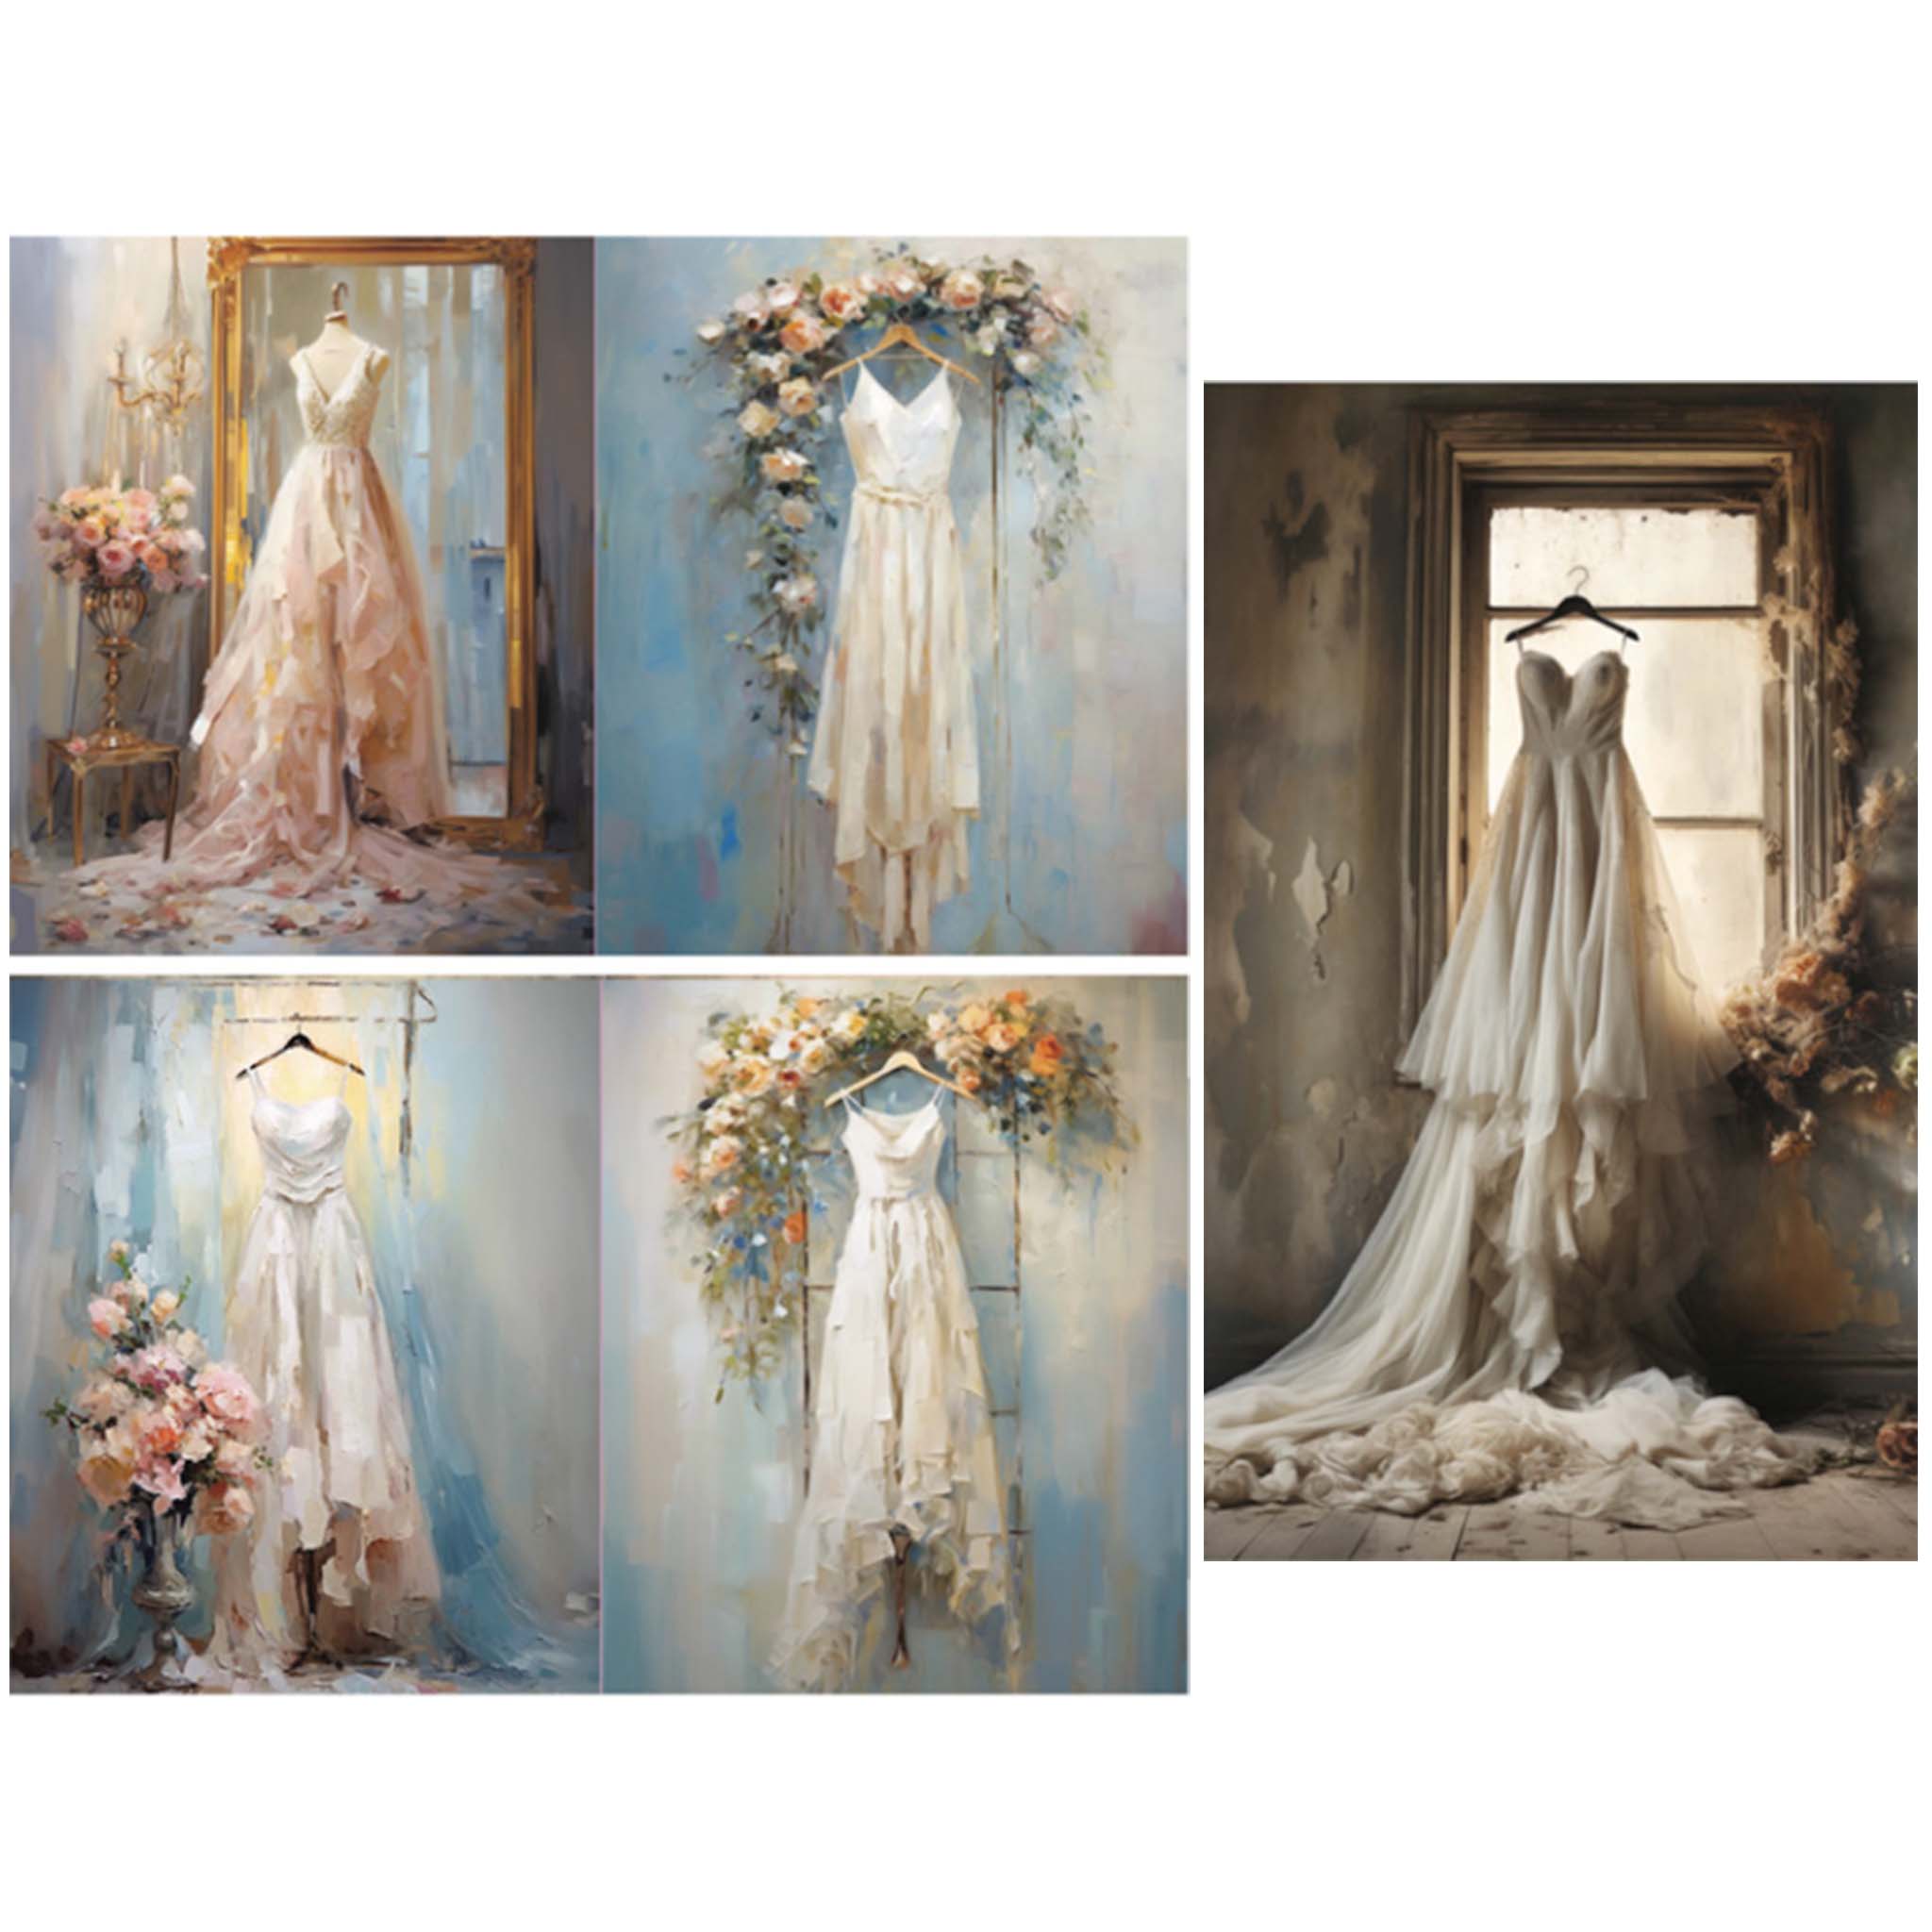 Three sheets of tissue paper against a white background that feature five unique white wedding gown designs against shabby chic backdrops with flowers.